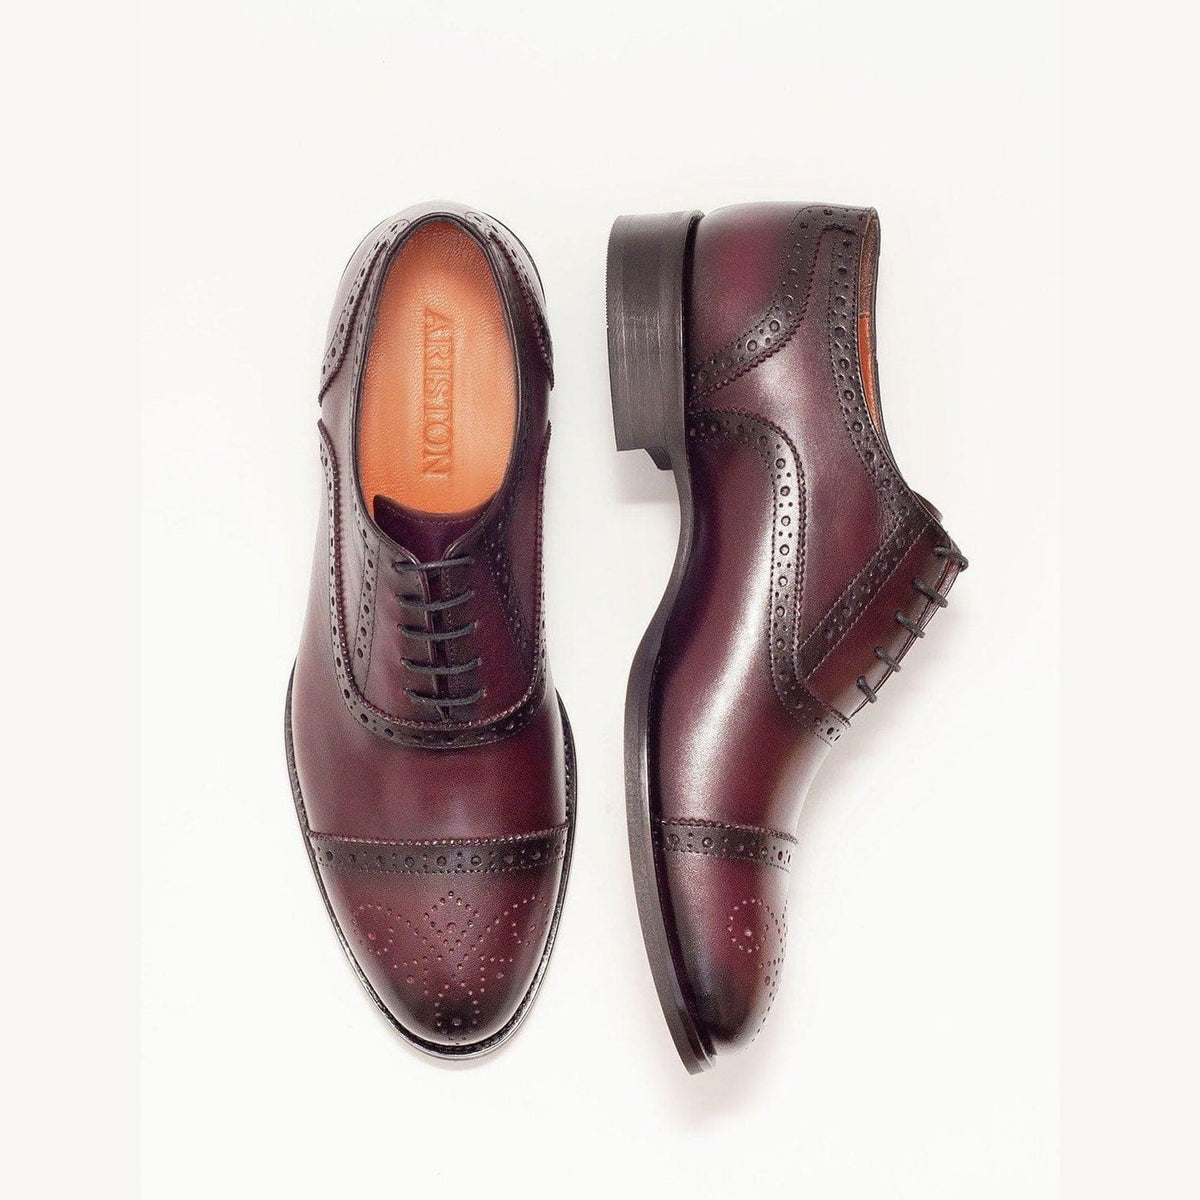 Ariston Ariston Mens Burgundy Oxford Lace-up Leather Dress Shoes